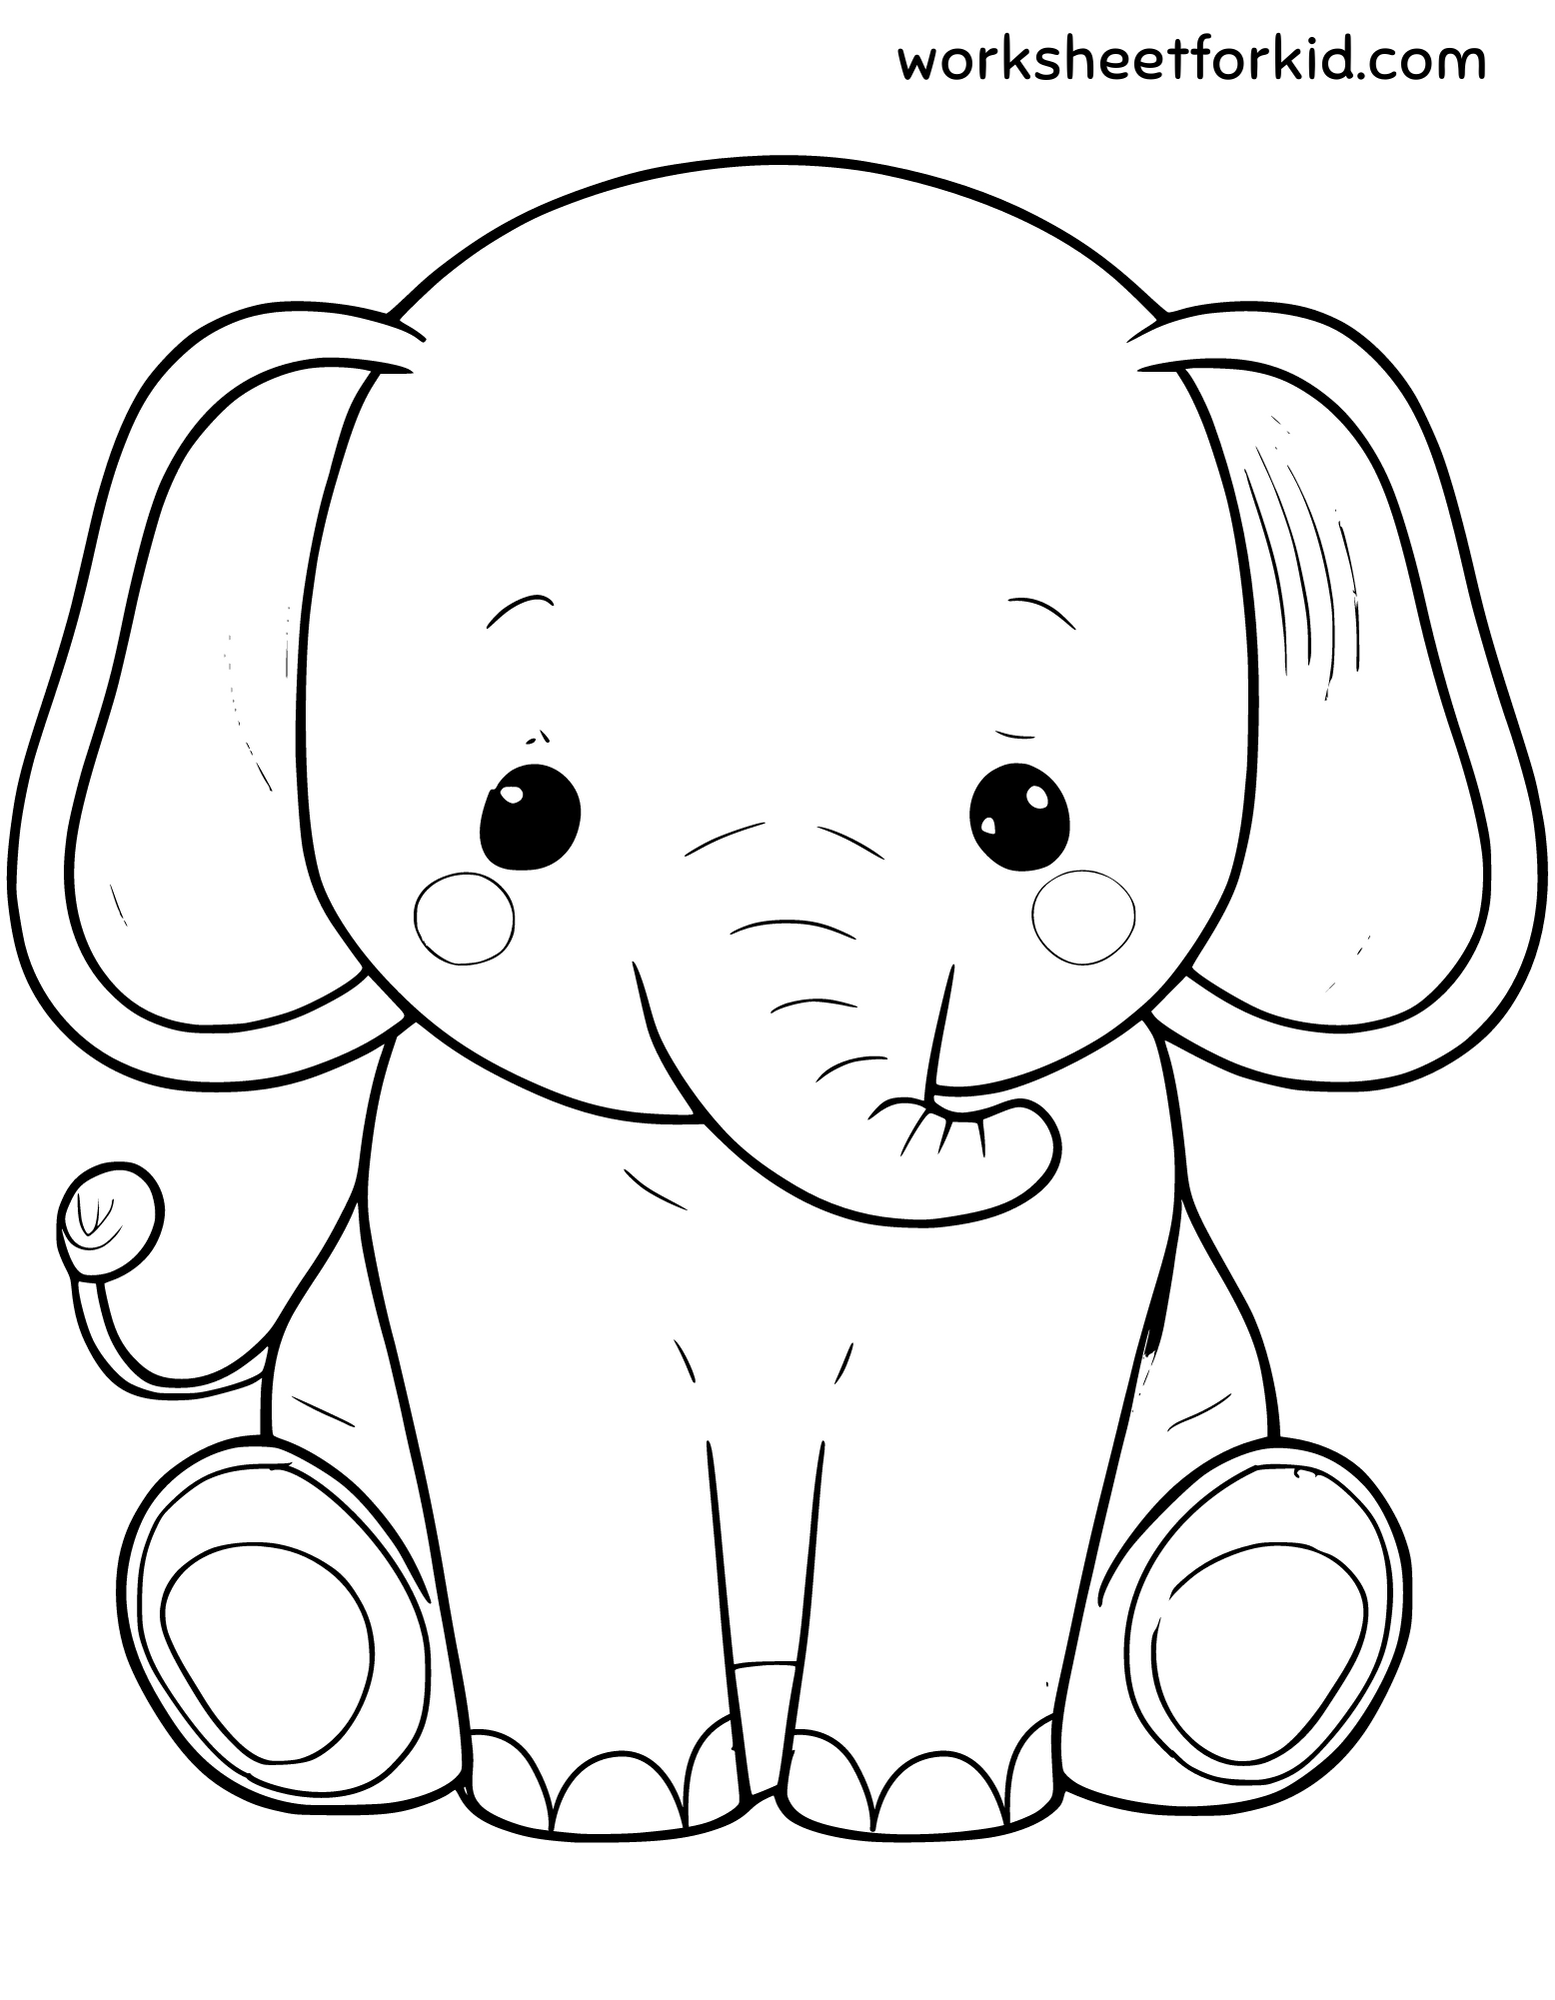 Free Animals Coloring Pages-24